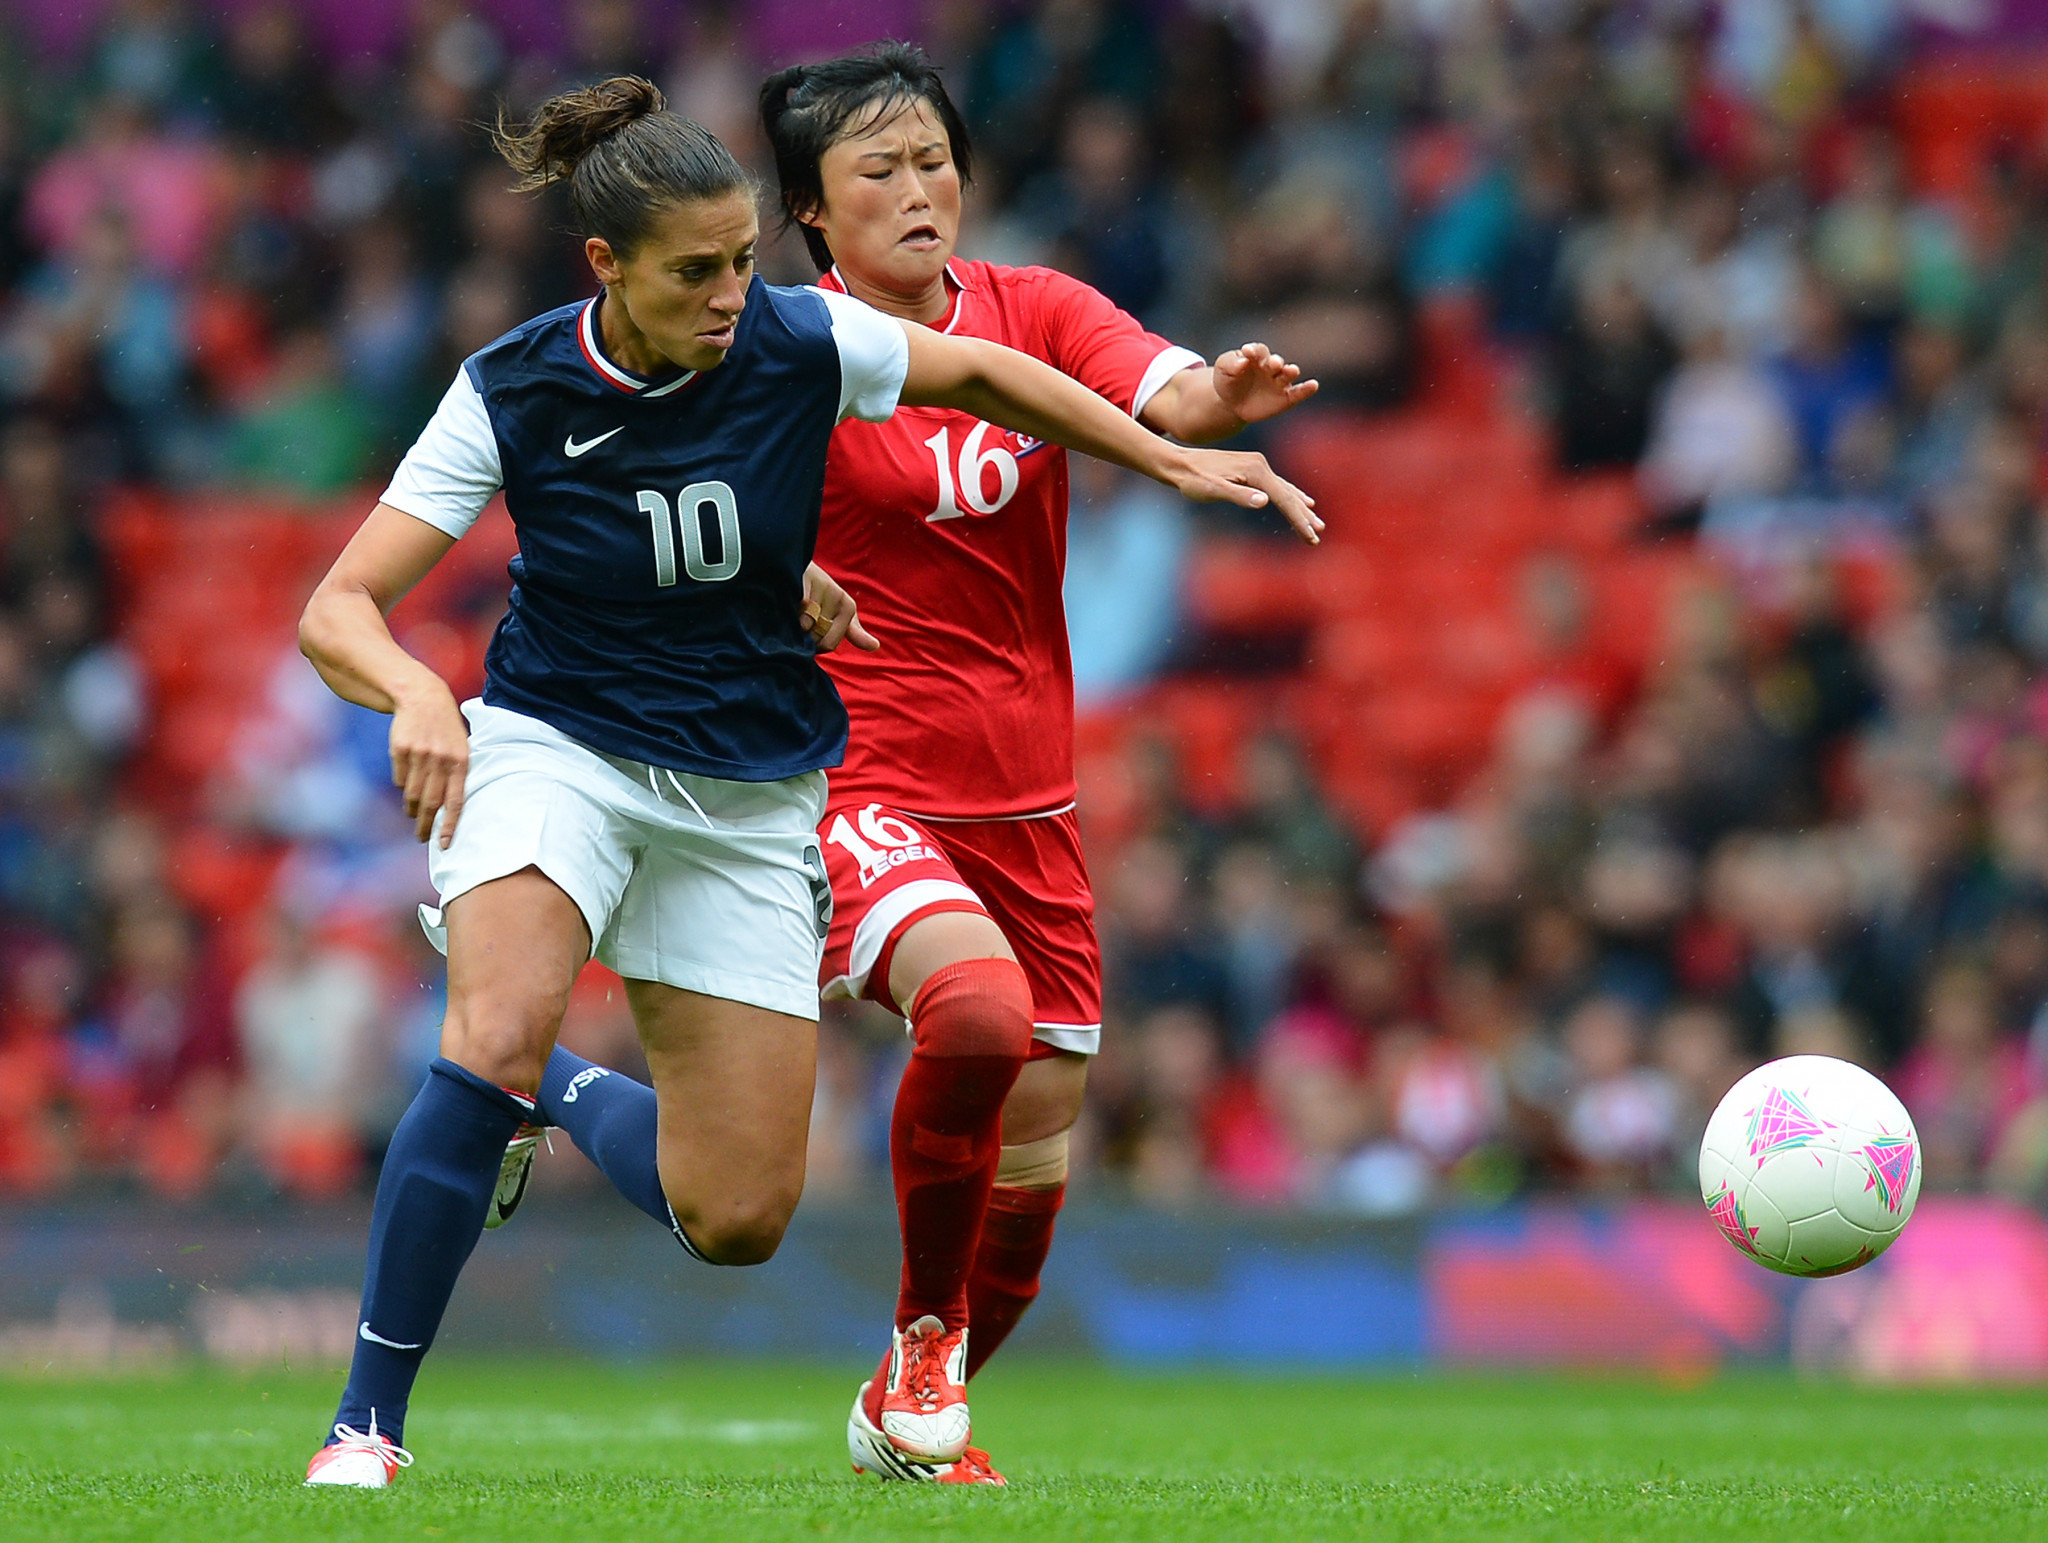 Carli Lloyd has twice won the Olympic gold in 2008 and 2012 ©Getty Images